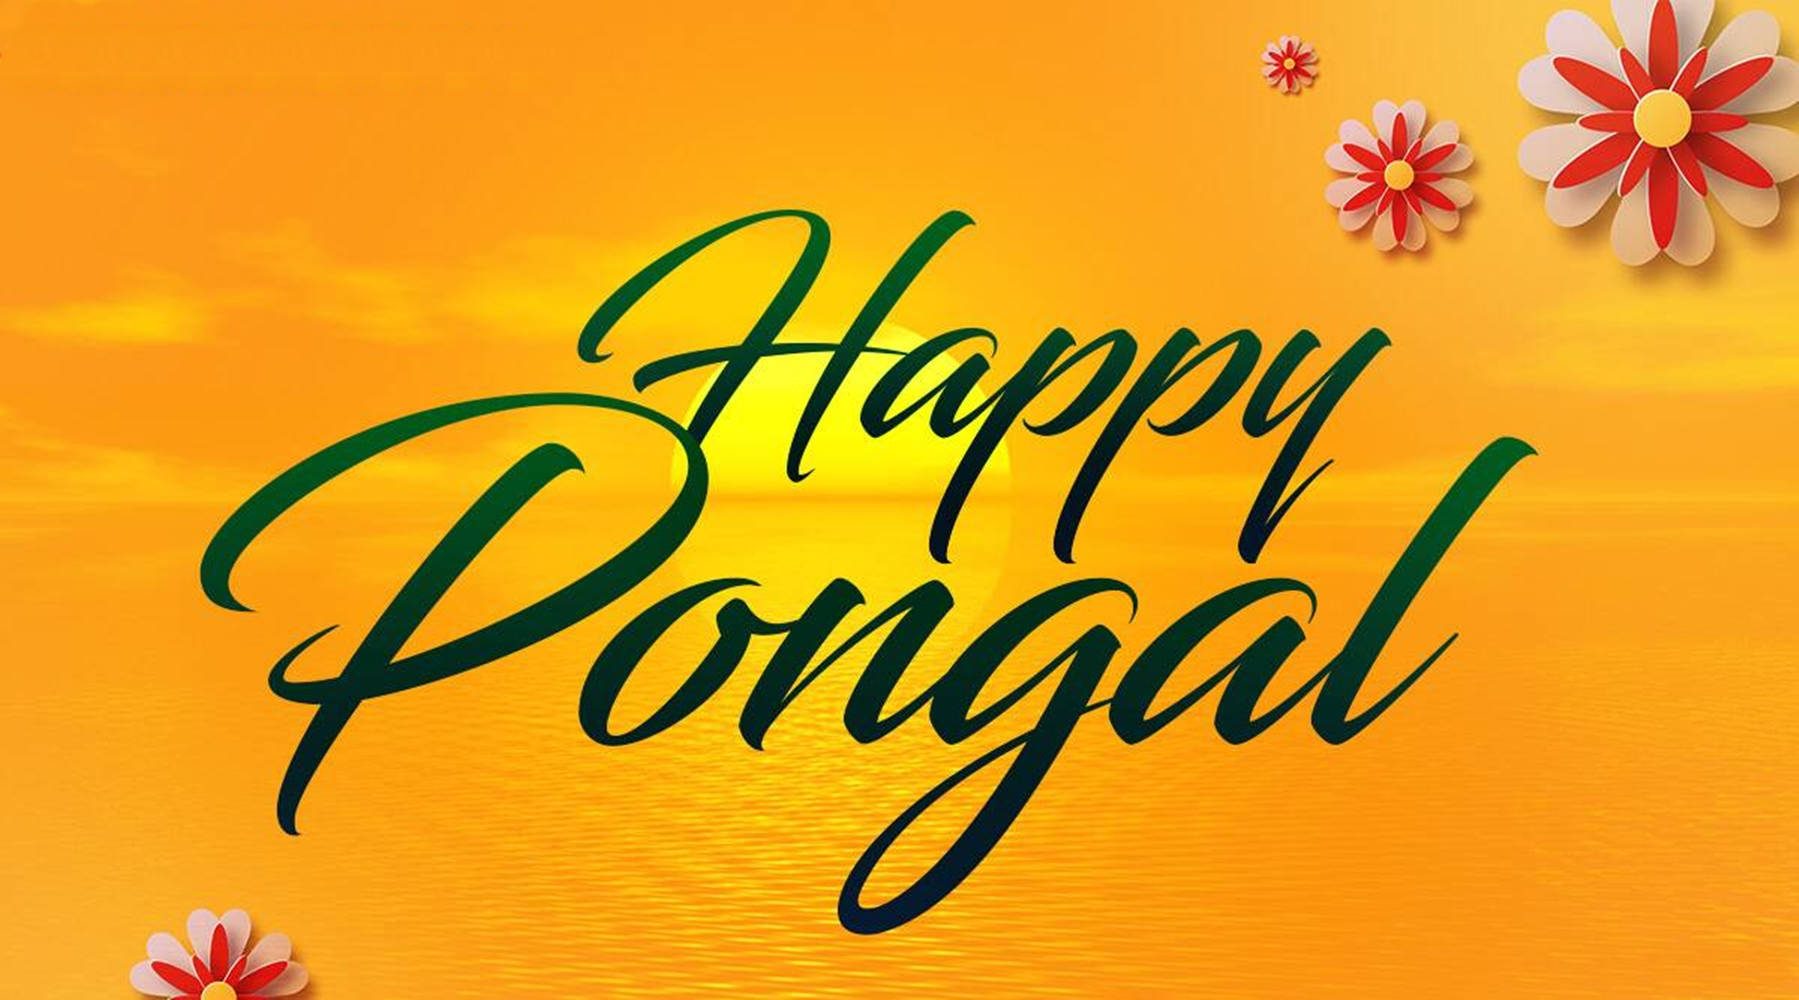 Happy Pongal Holiday Greeting Background